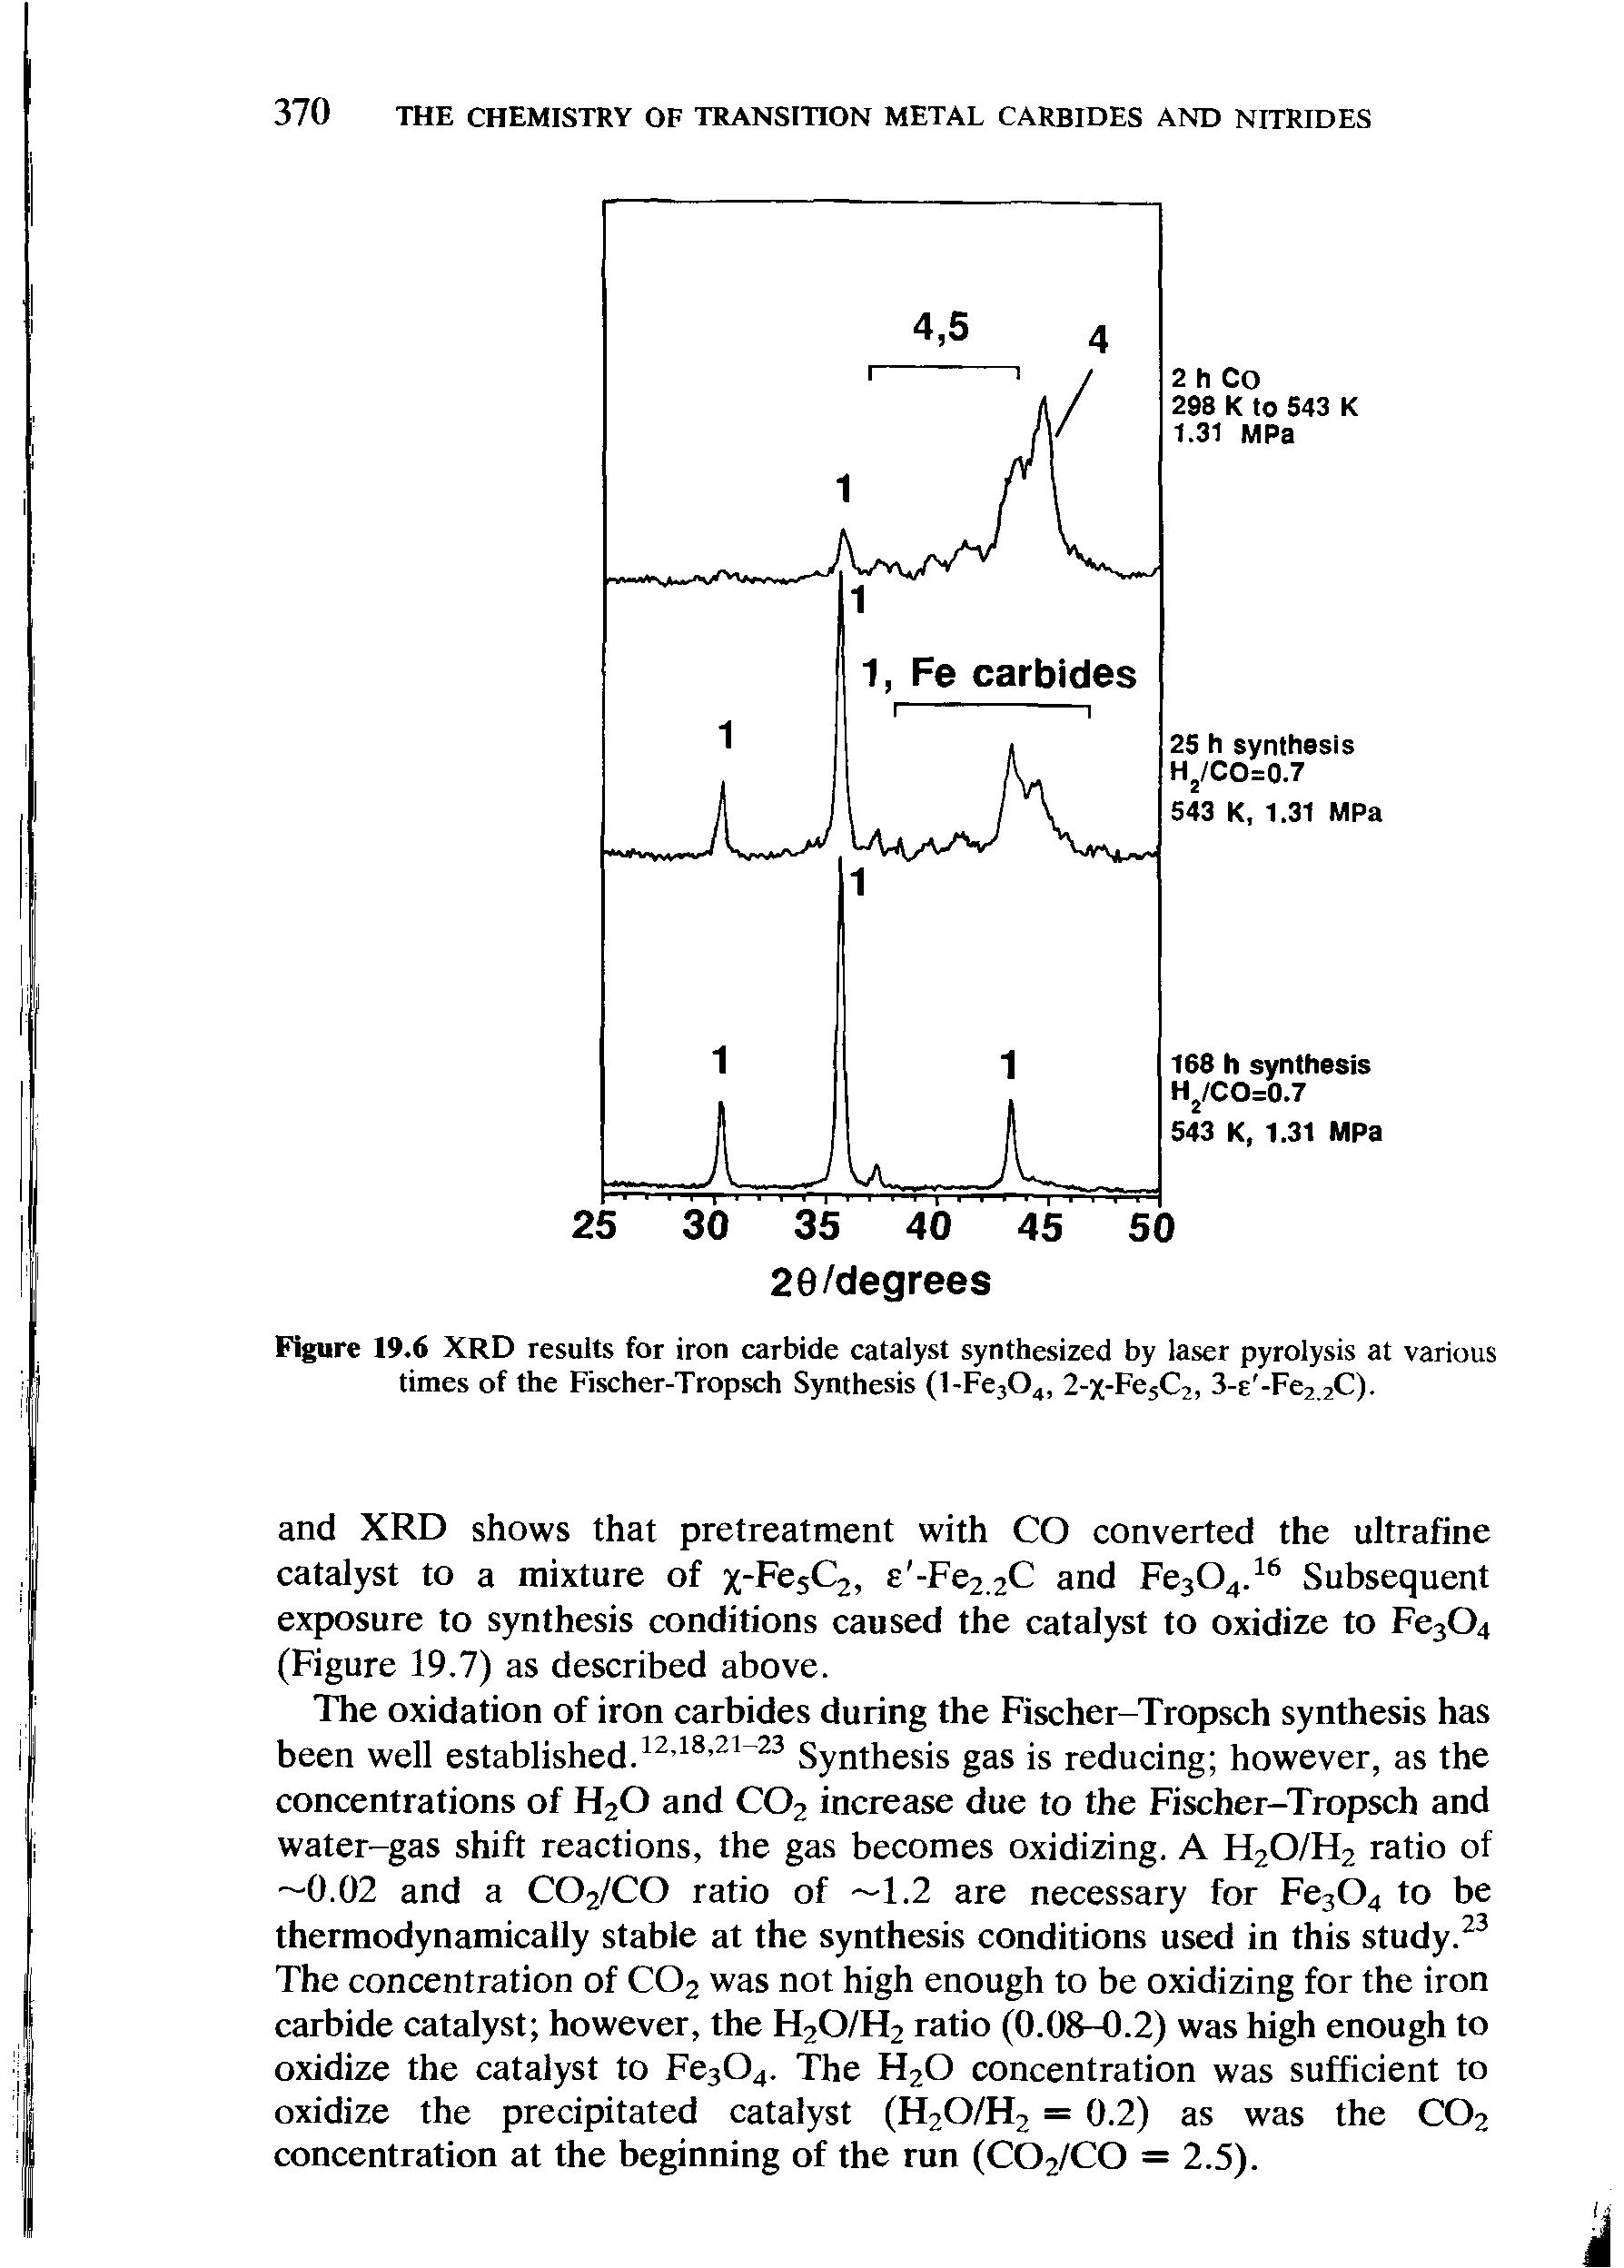 Figure 19.6 XRD results for iron carbide catalyst synthesized by laser pyrolysis at various times of the Fischer-Tropsch Synthesis (1-Fe304, 2-x-Fe5C2, 3-e -Fe2 2C).